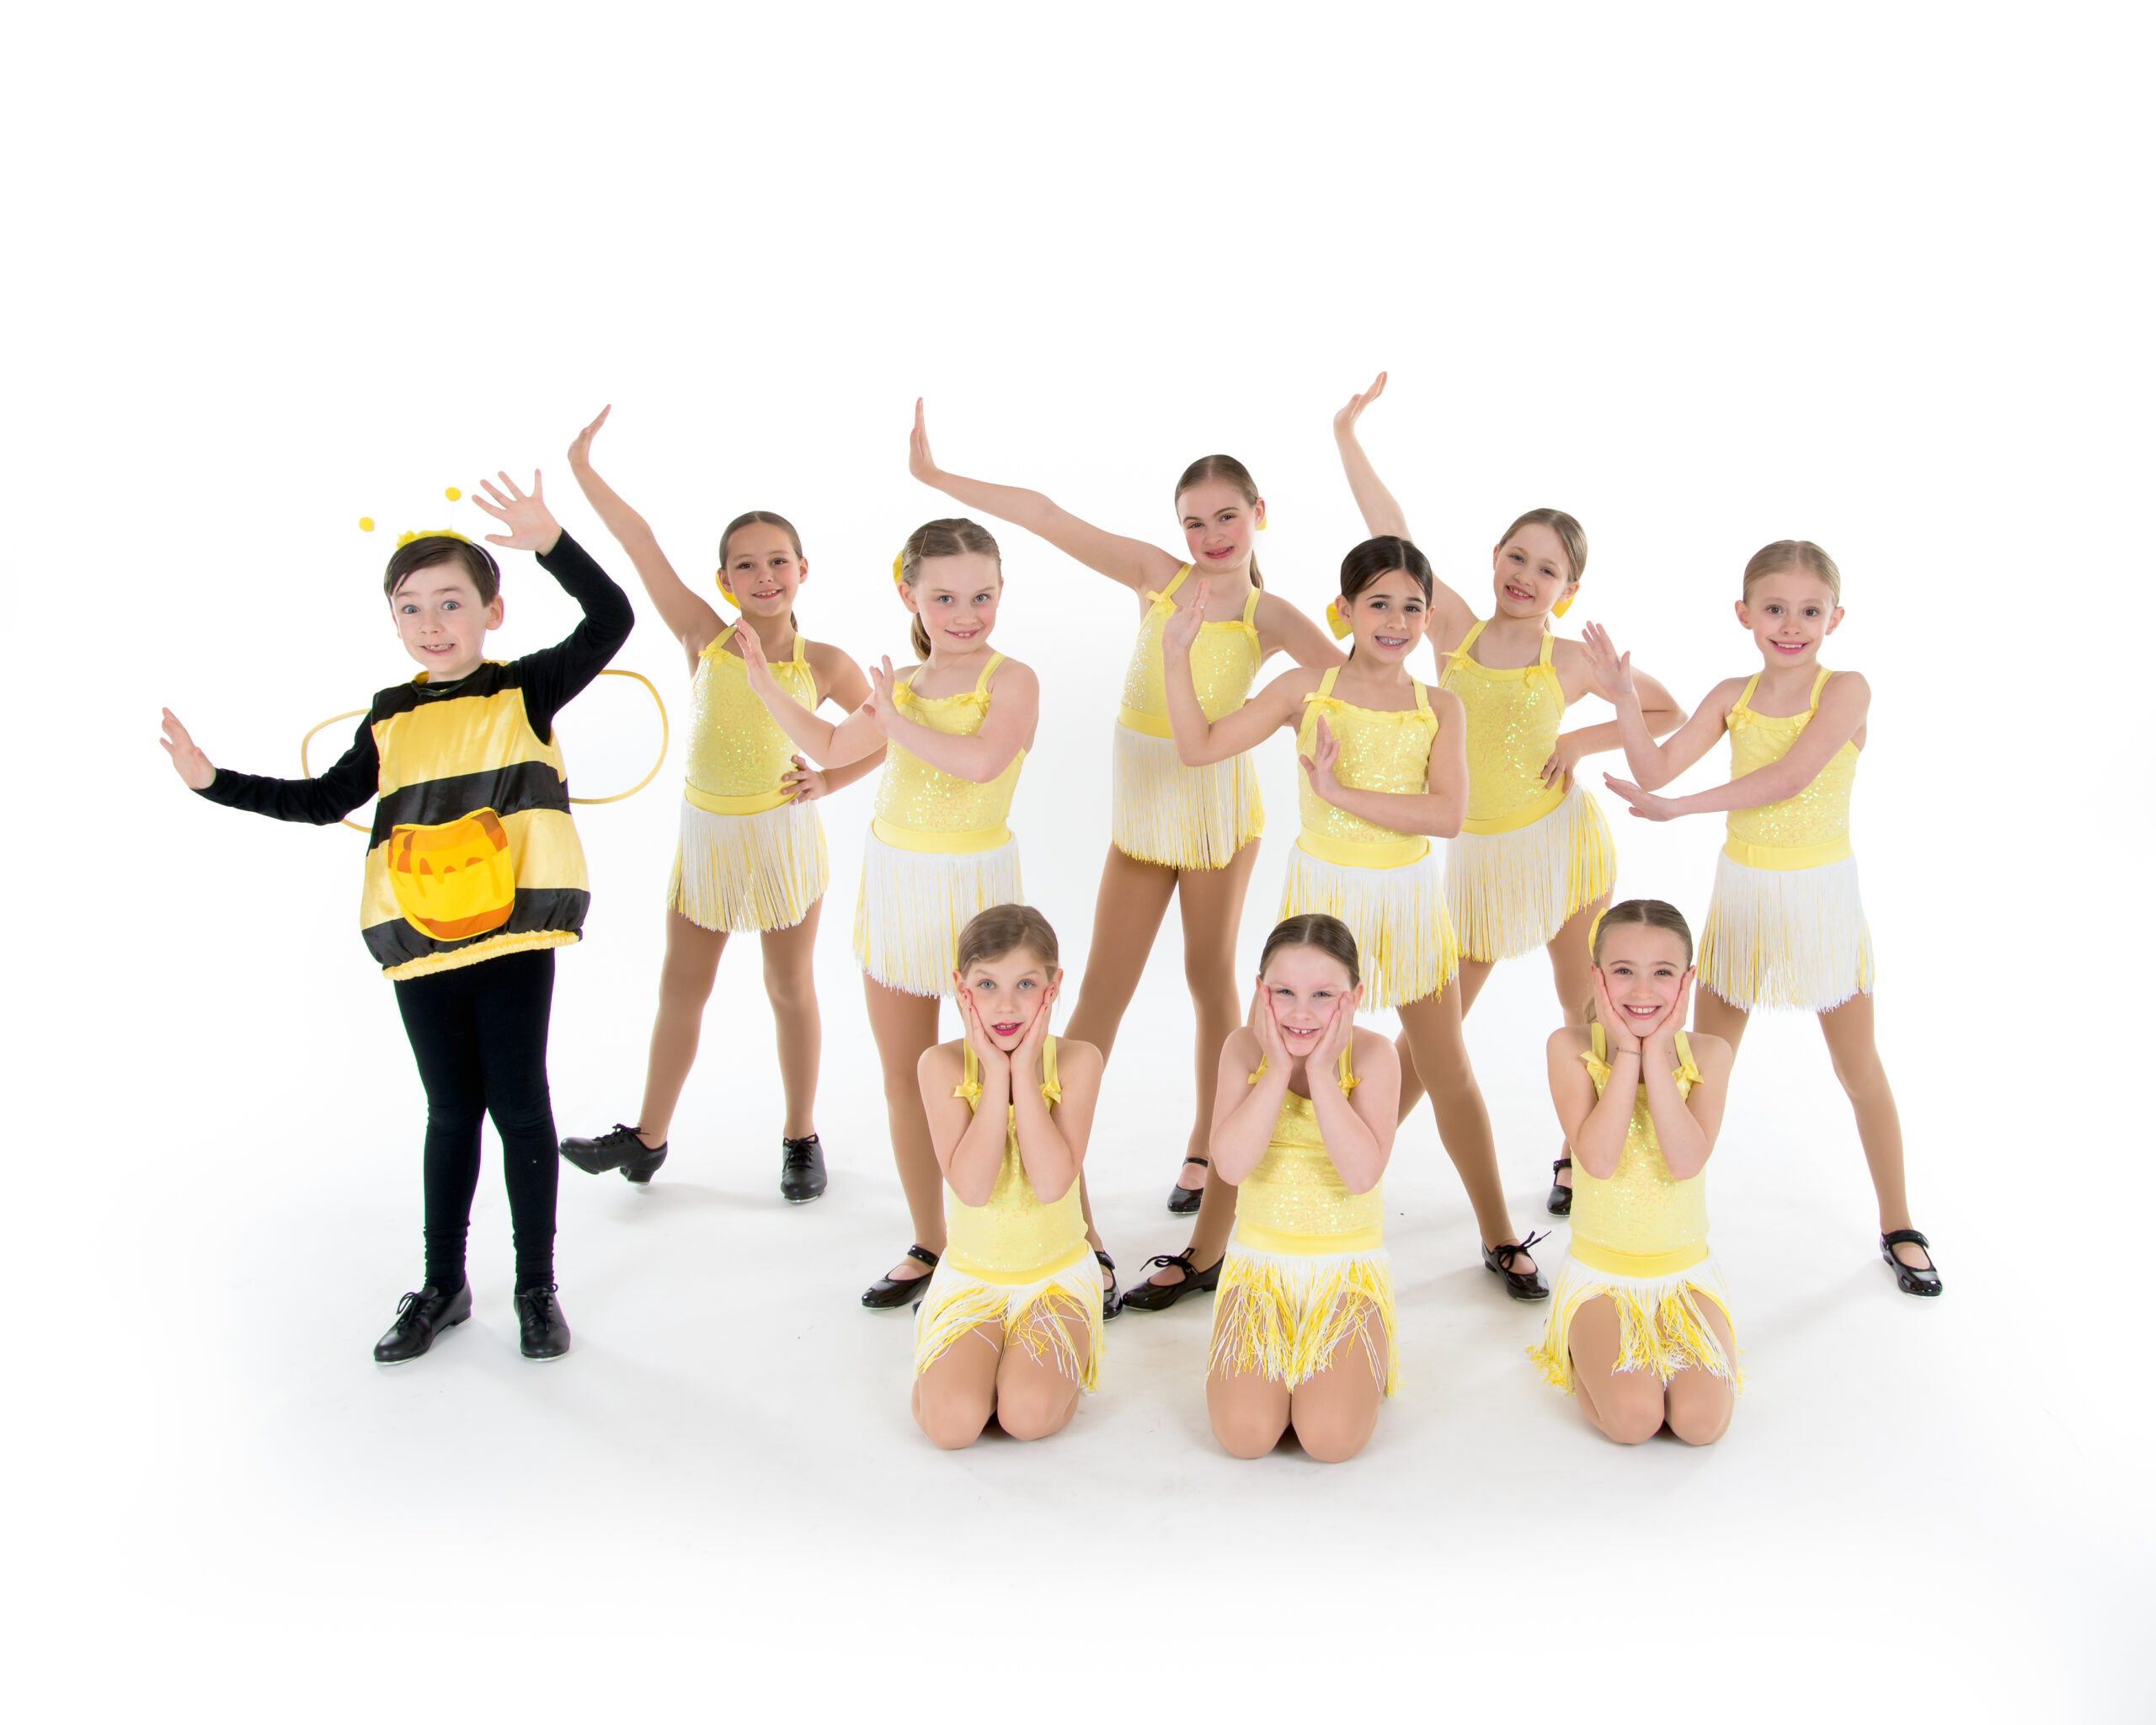 Level One Combo dressed in yellow and our male dancer as a bumble bee.